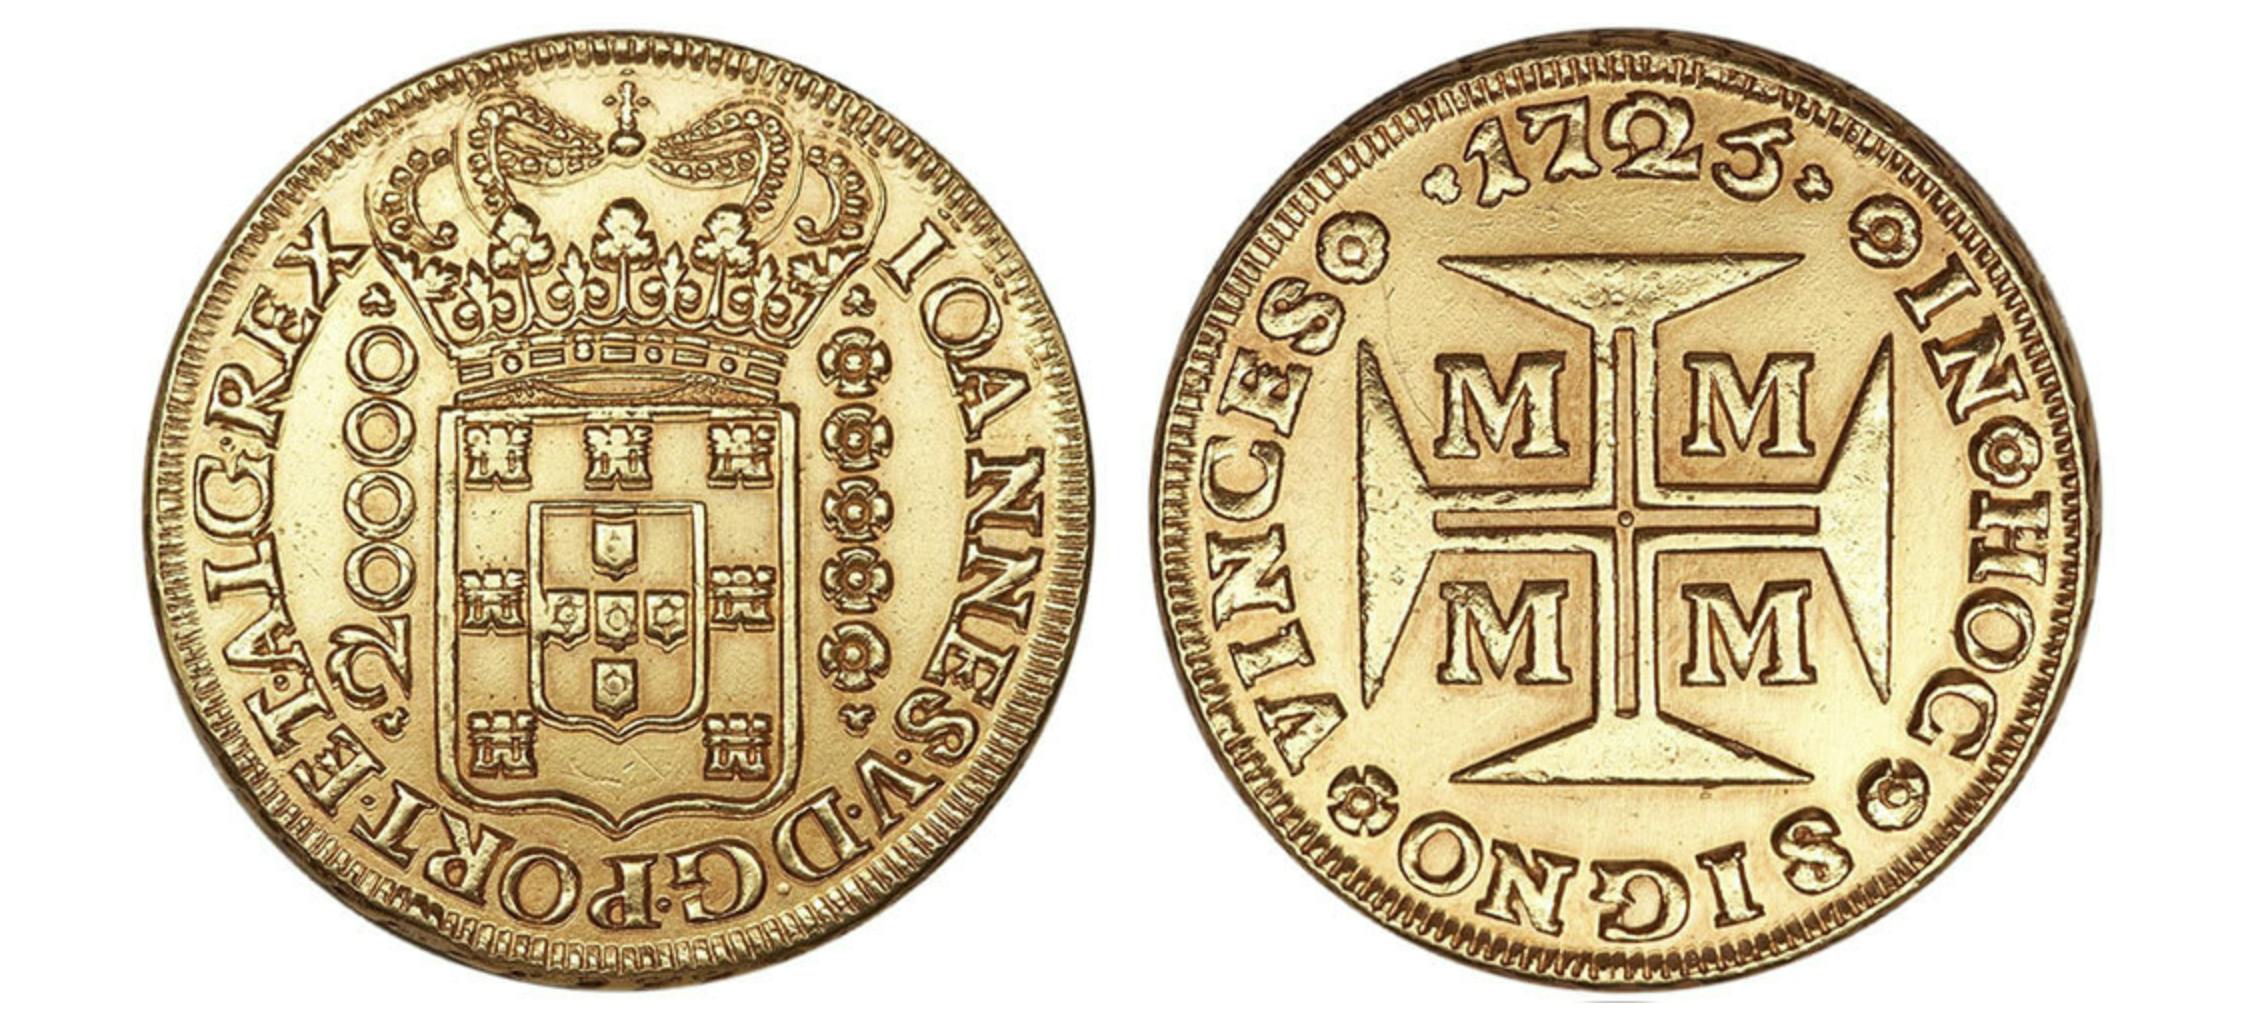 Dobrão of D. João V   Gold coin from Portugal, minted in Minas Gerais in 1727  Diameter: 38 mm, Weight: 53.80 g, Metal: Gold 0.9166/1000